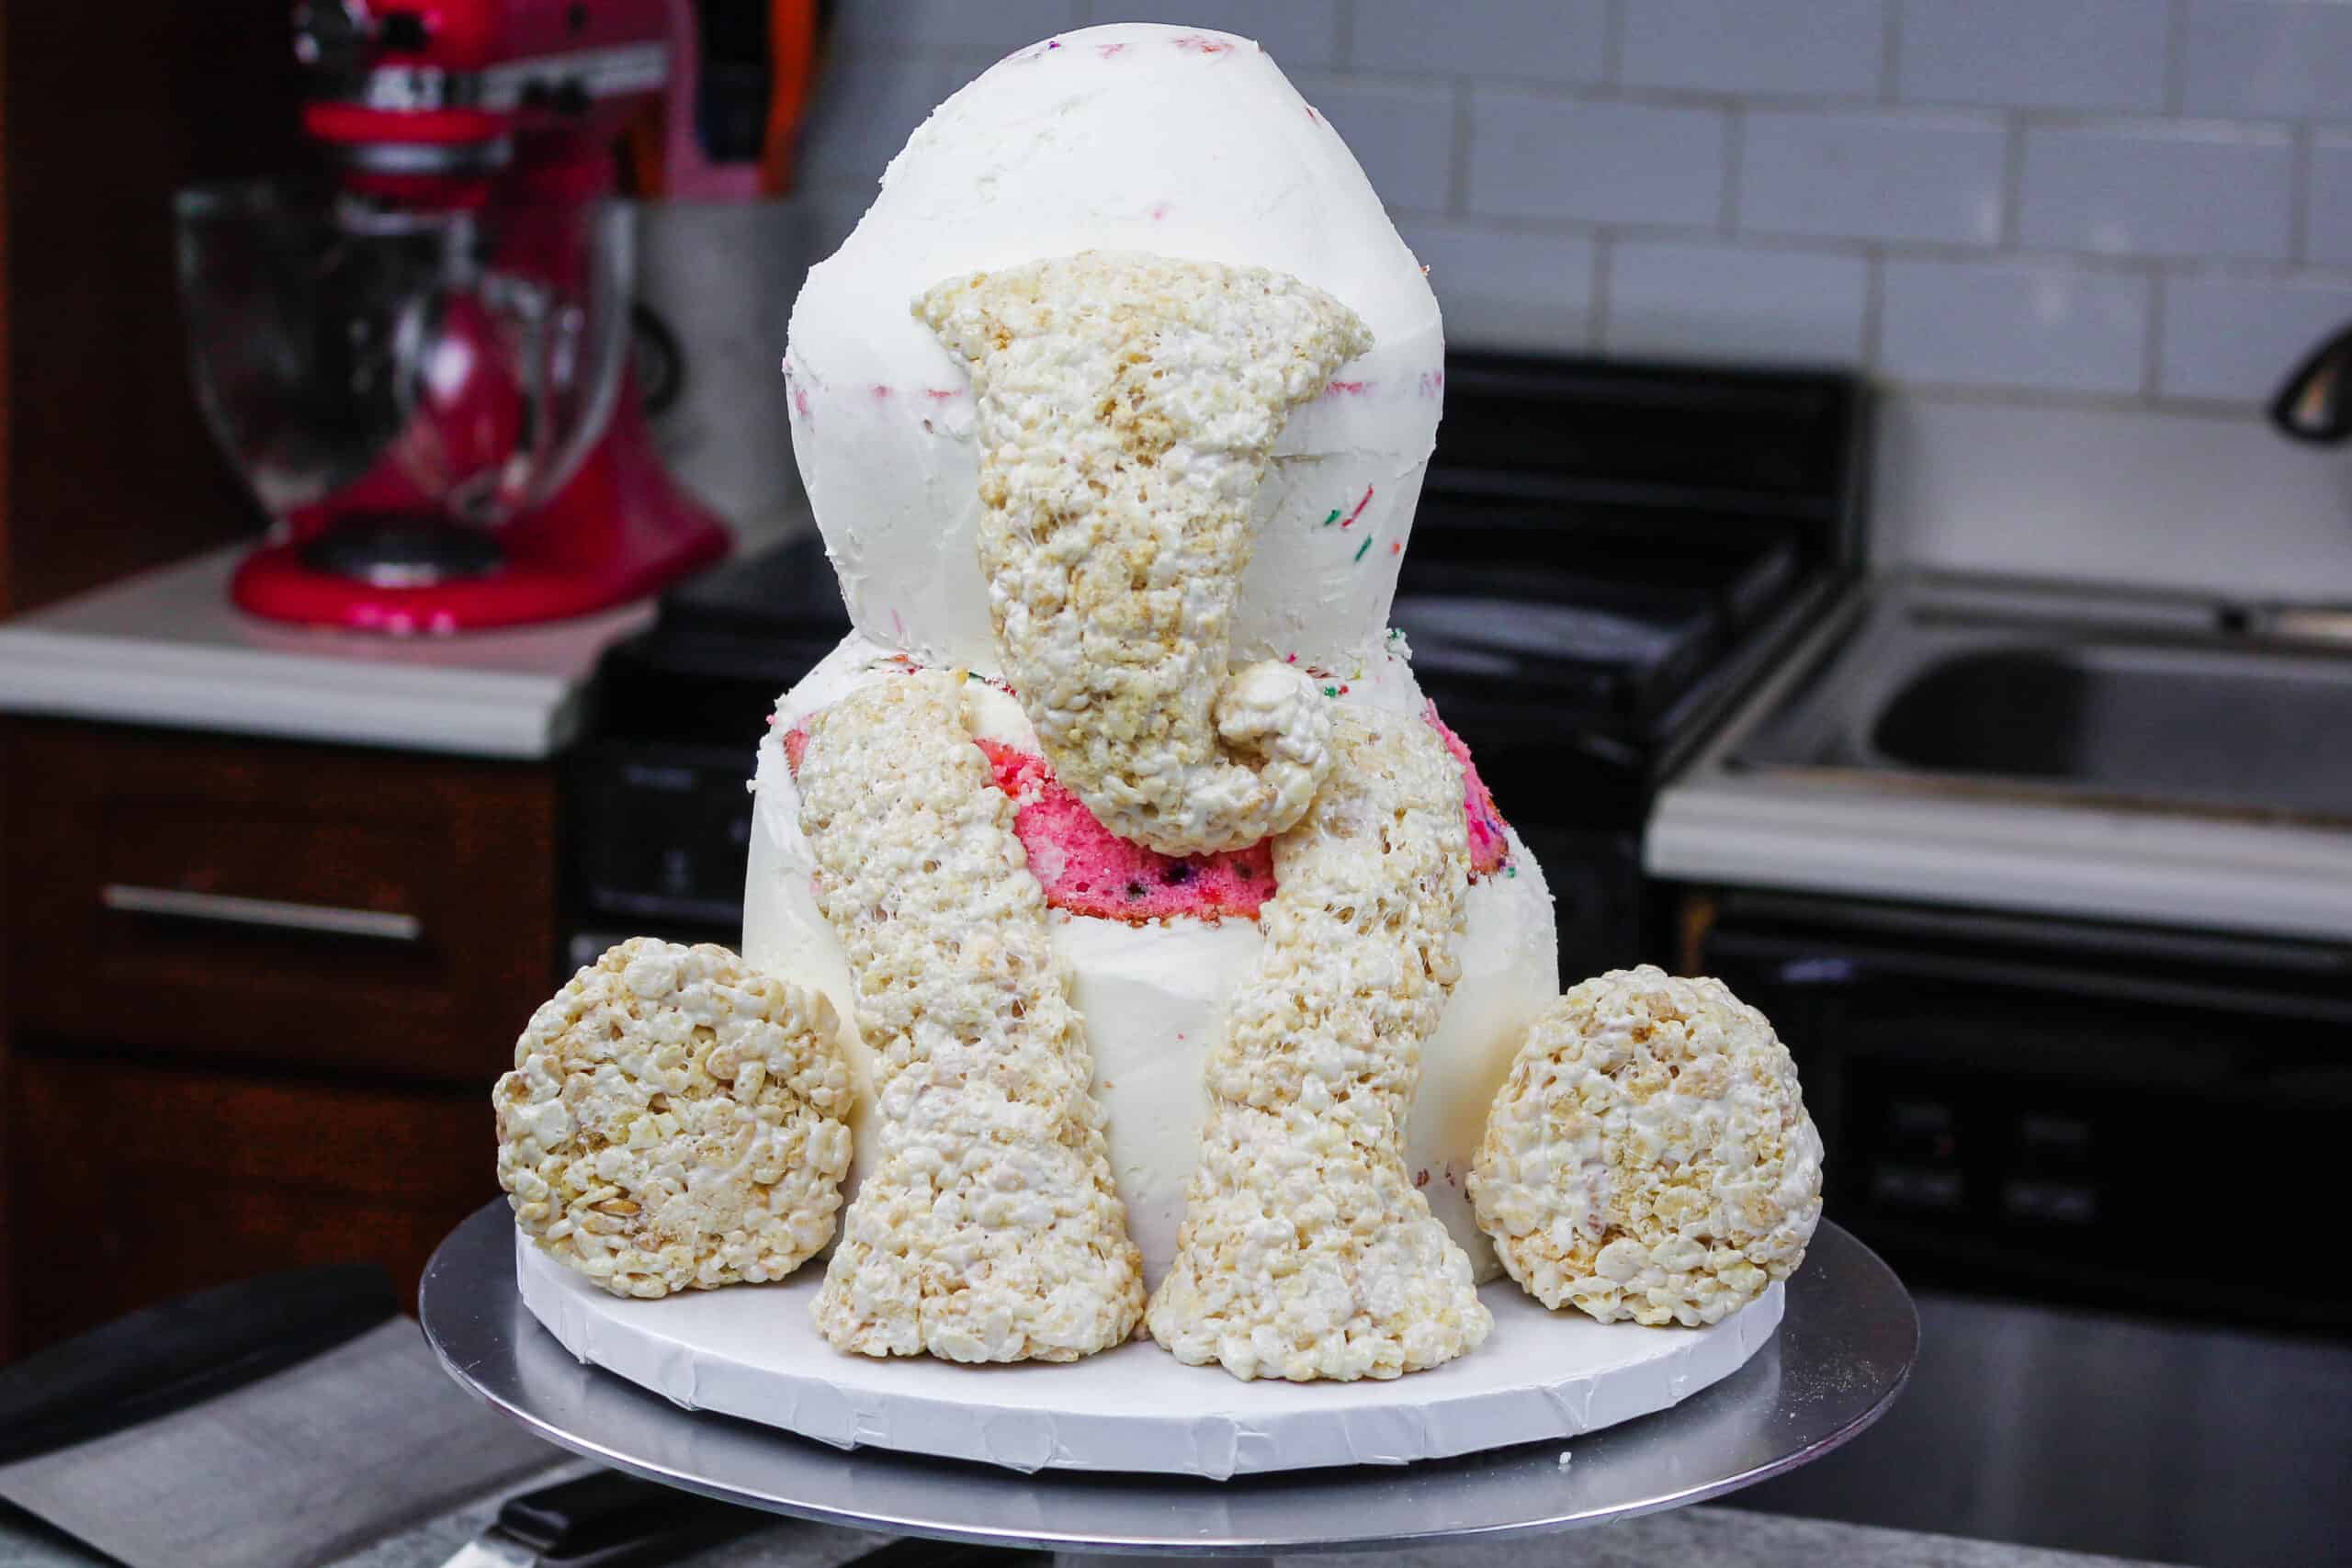 How To Make A Rice Crispy Sculpture